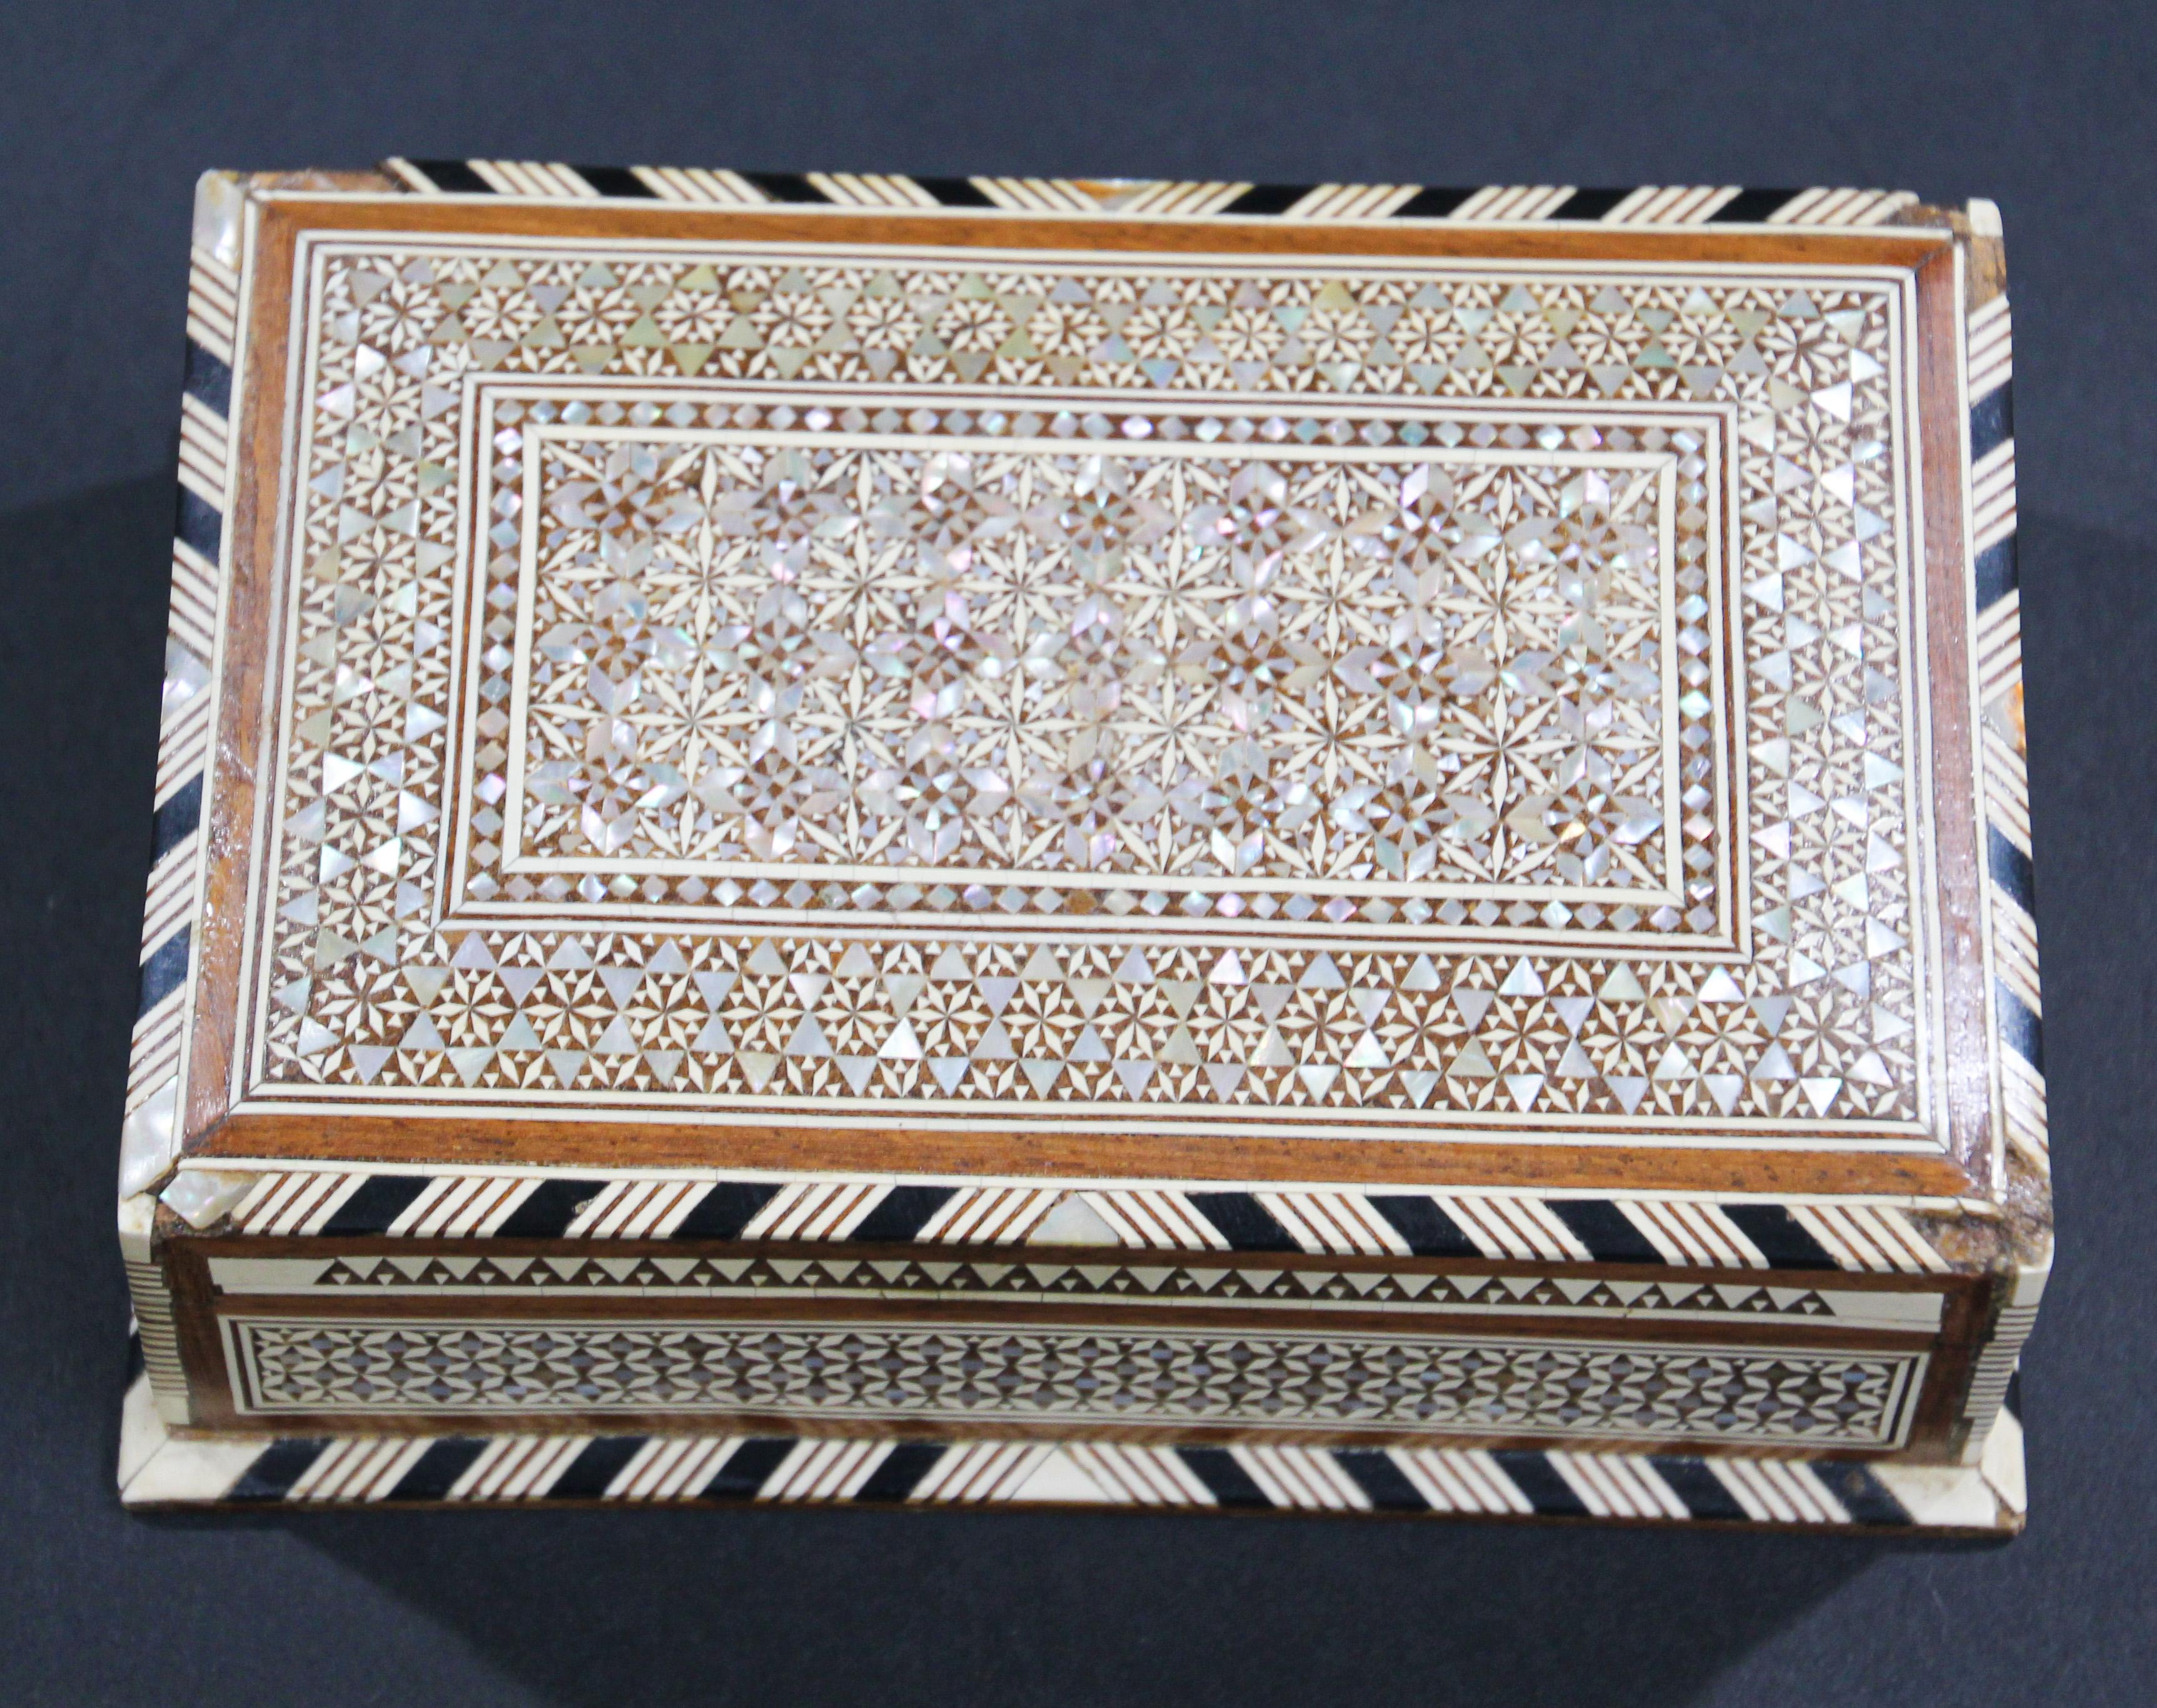 Inlay Moorish Handcrafted Middle Eastern Mosaic Inlaid Decorative Box For Sale